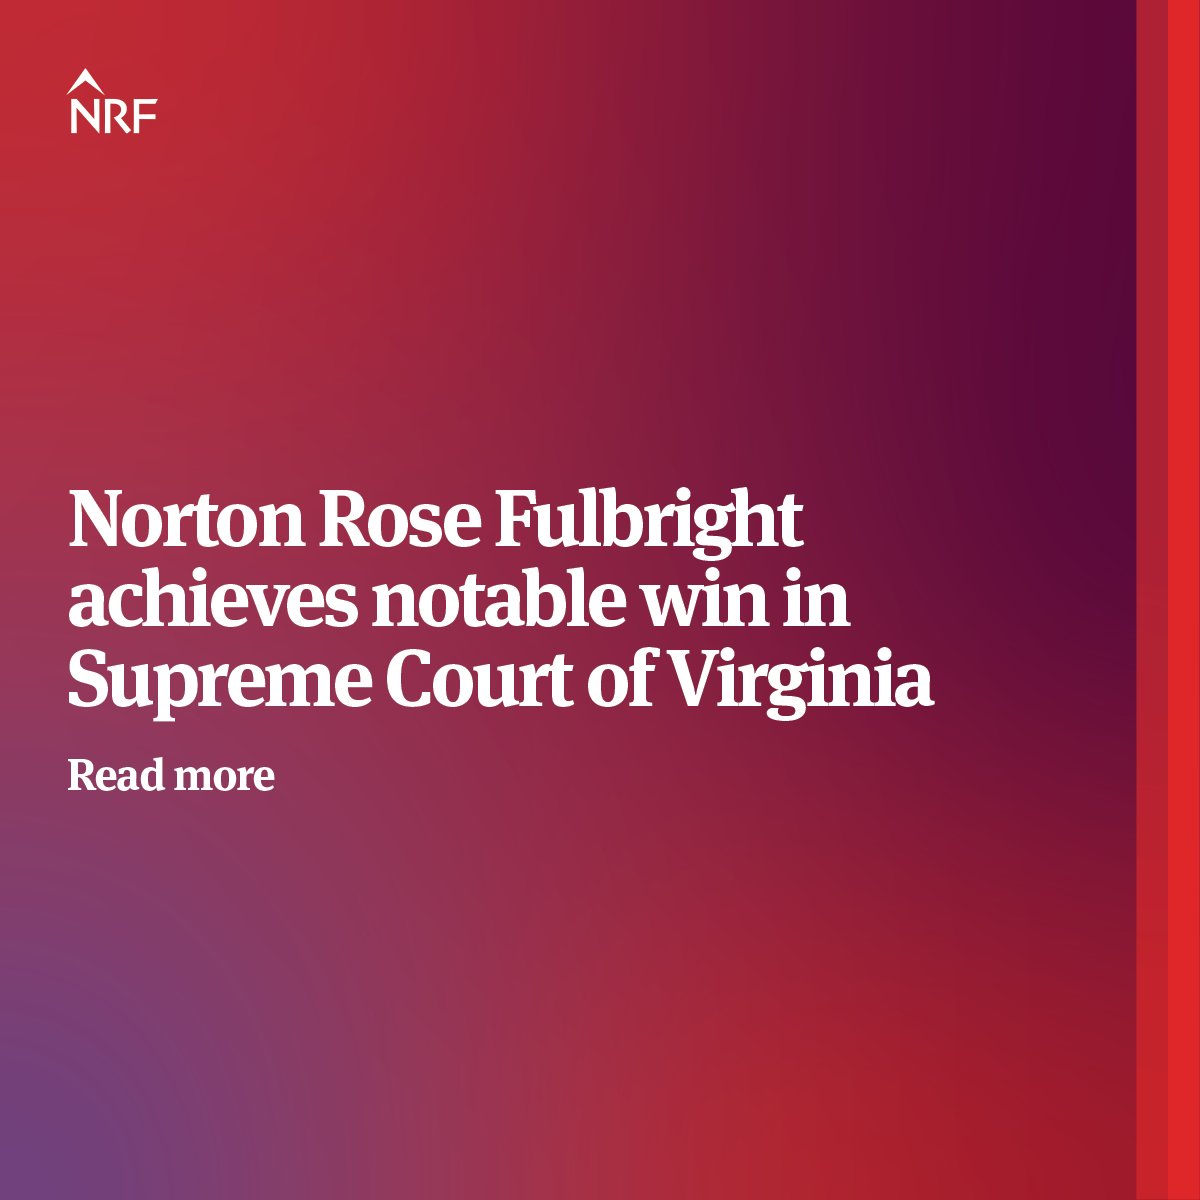 A litigation team led by Tom Coulter won on all counts in the Supreme Court of Virginia. This ruling overturned a trial court decision that had dismissed the firm’s complaint on sovereign immunity grounds and reversed the Virginia Court of Appeals decision.ow.ly/Ti5o50RFGxl